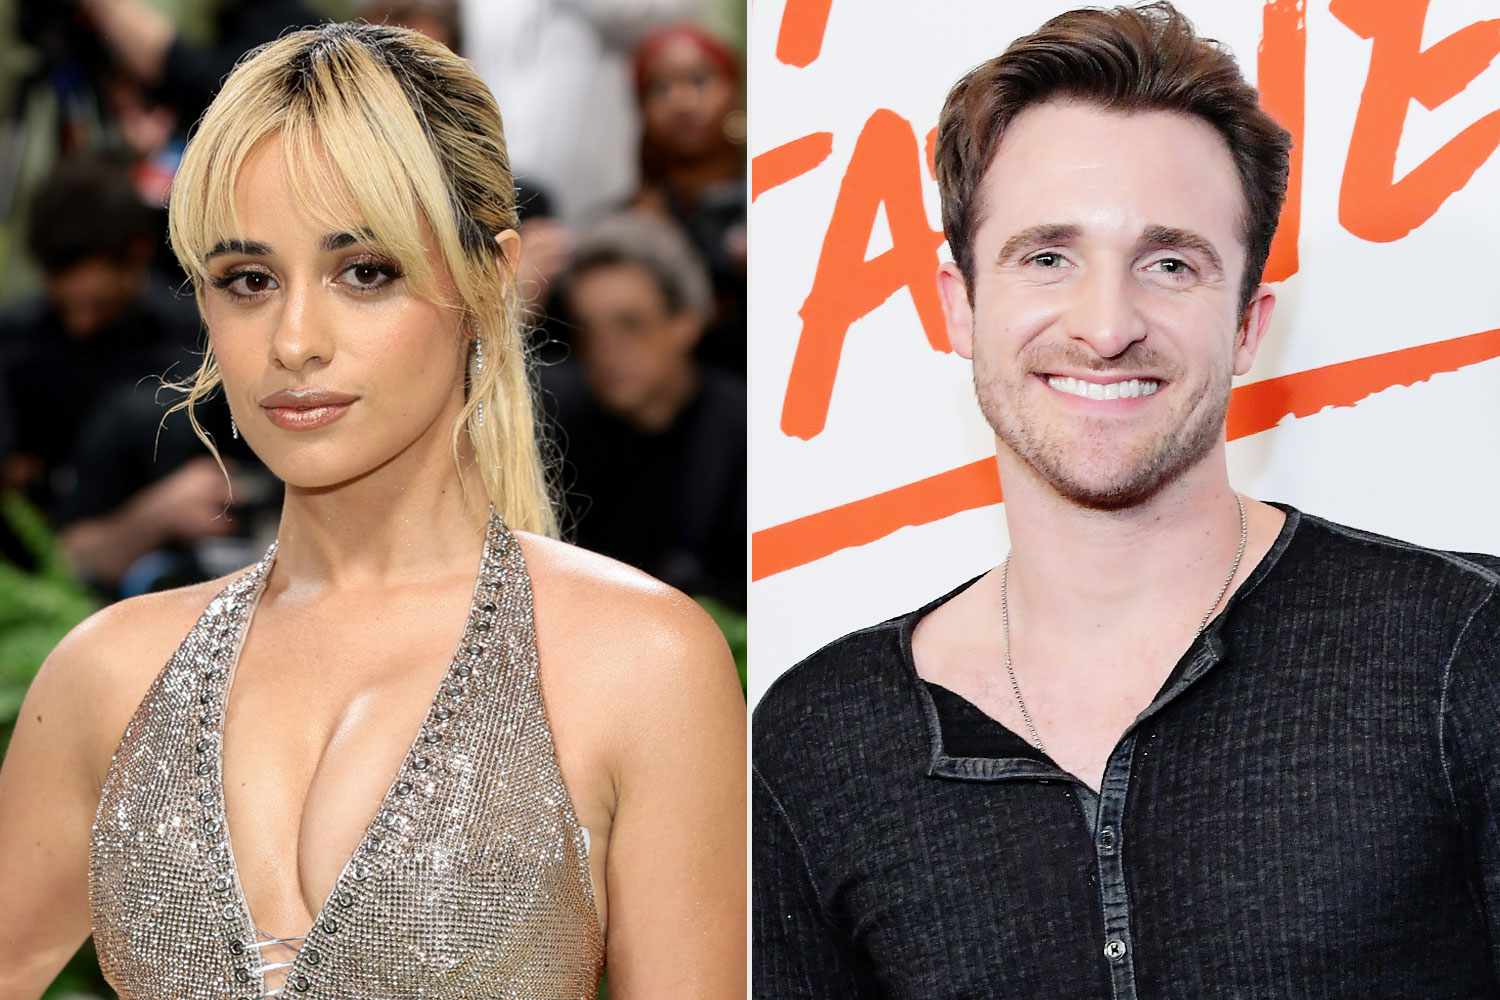 Camila Cabello Reveals She Lost Her Virginity to Ex-Boyfriend Matthew Hussey at Age 20: 'It Was Beautiful'